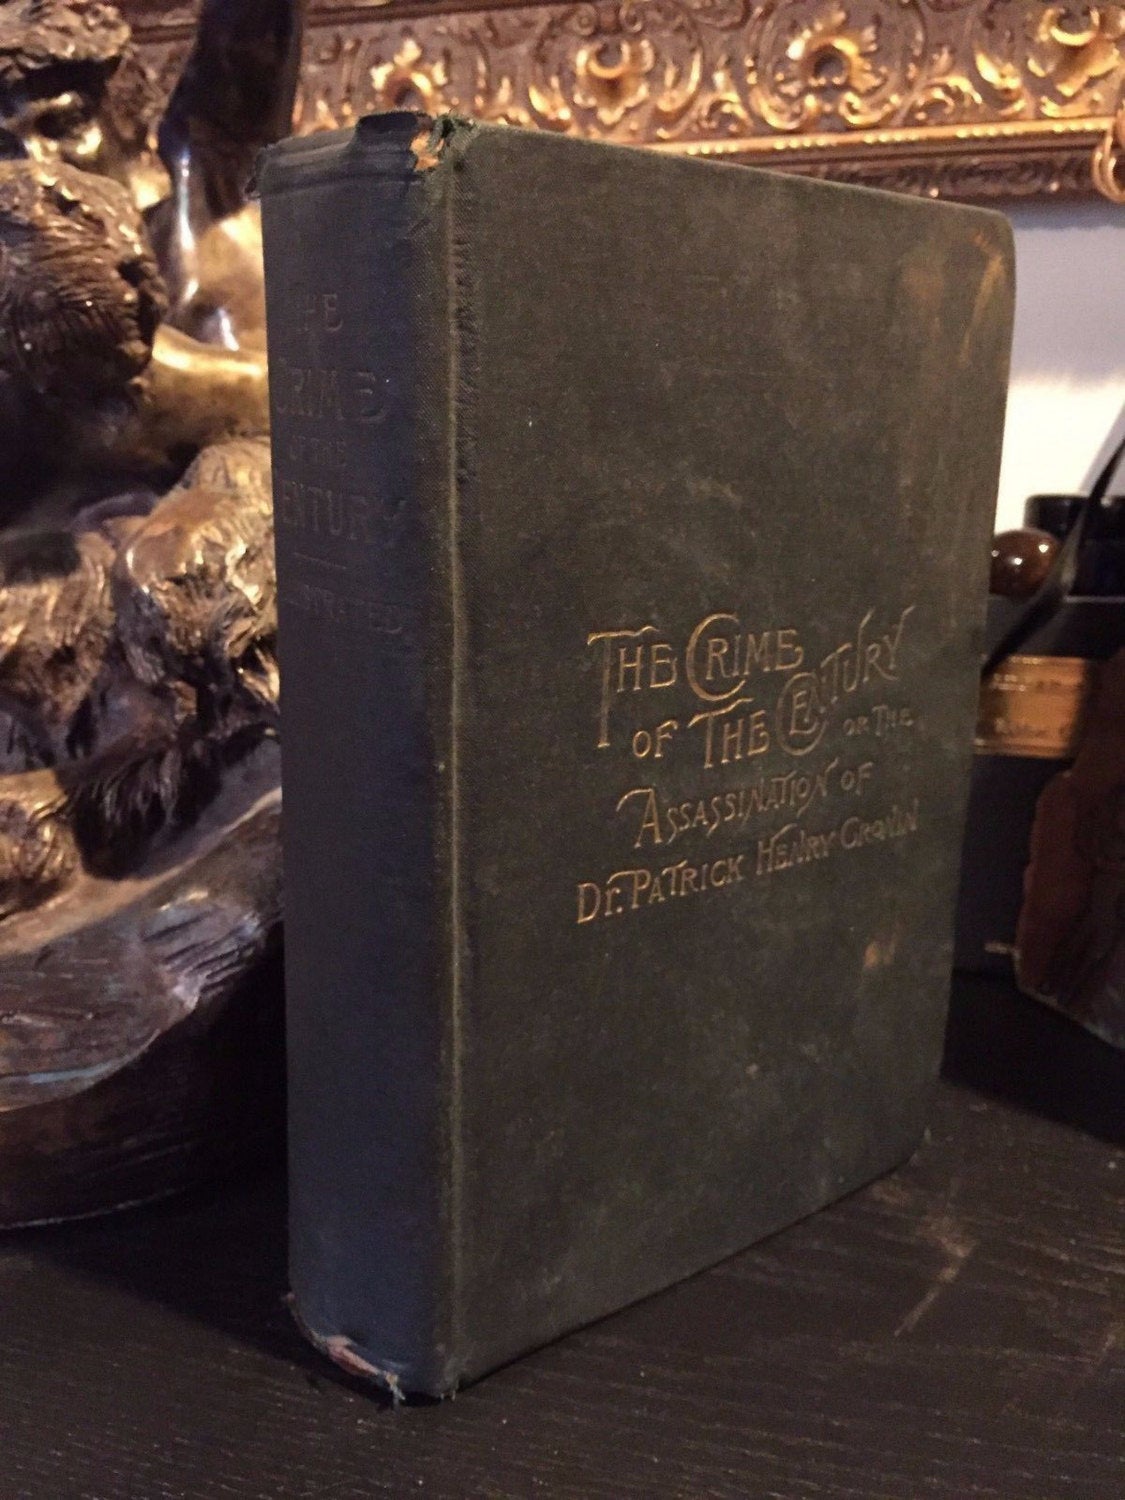 The Crime of the Century, Henry M. Hunt, 1st. Ed., 1889, Richly Illustrated